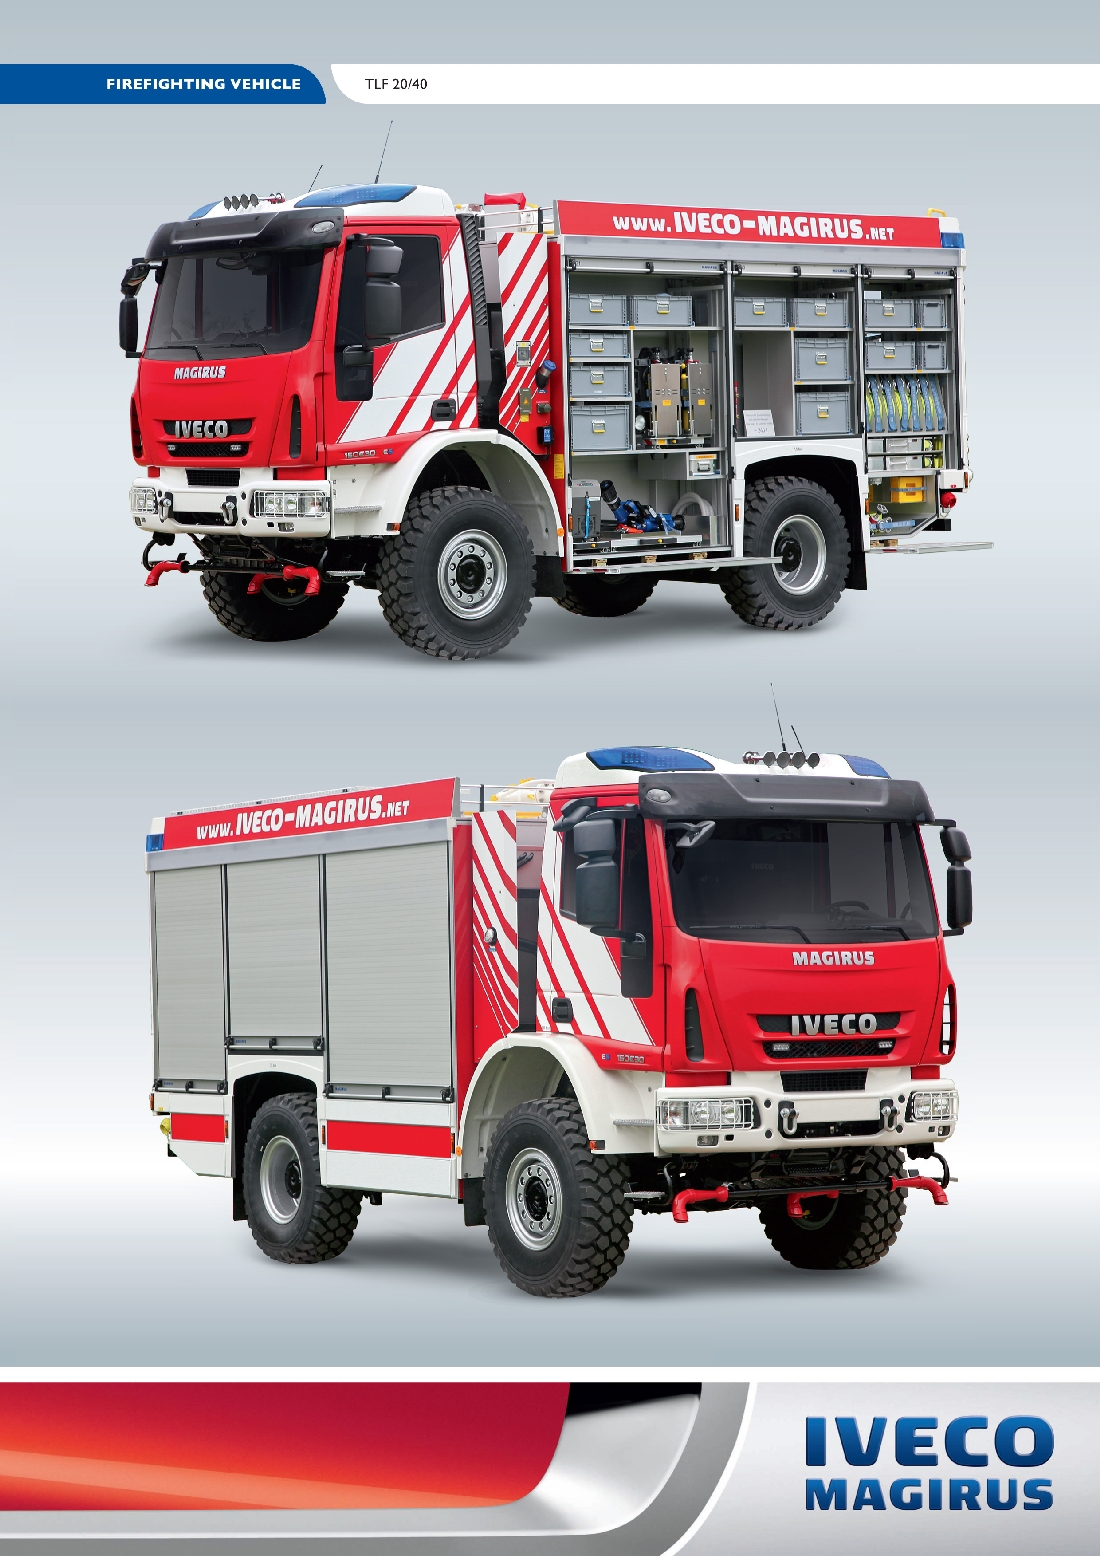 FIREFIGHTING VEHICLE TLF 2040 front